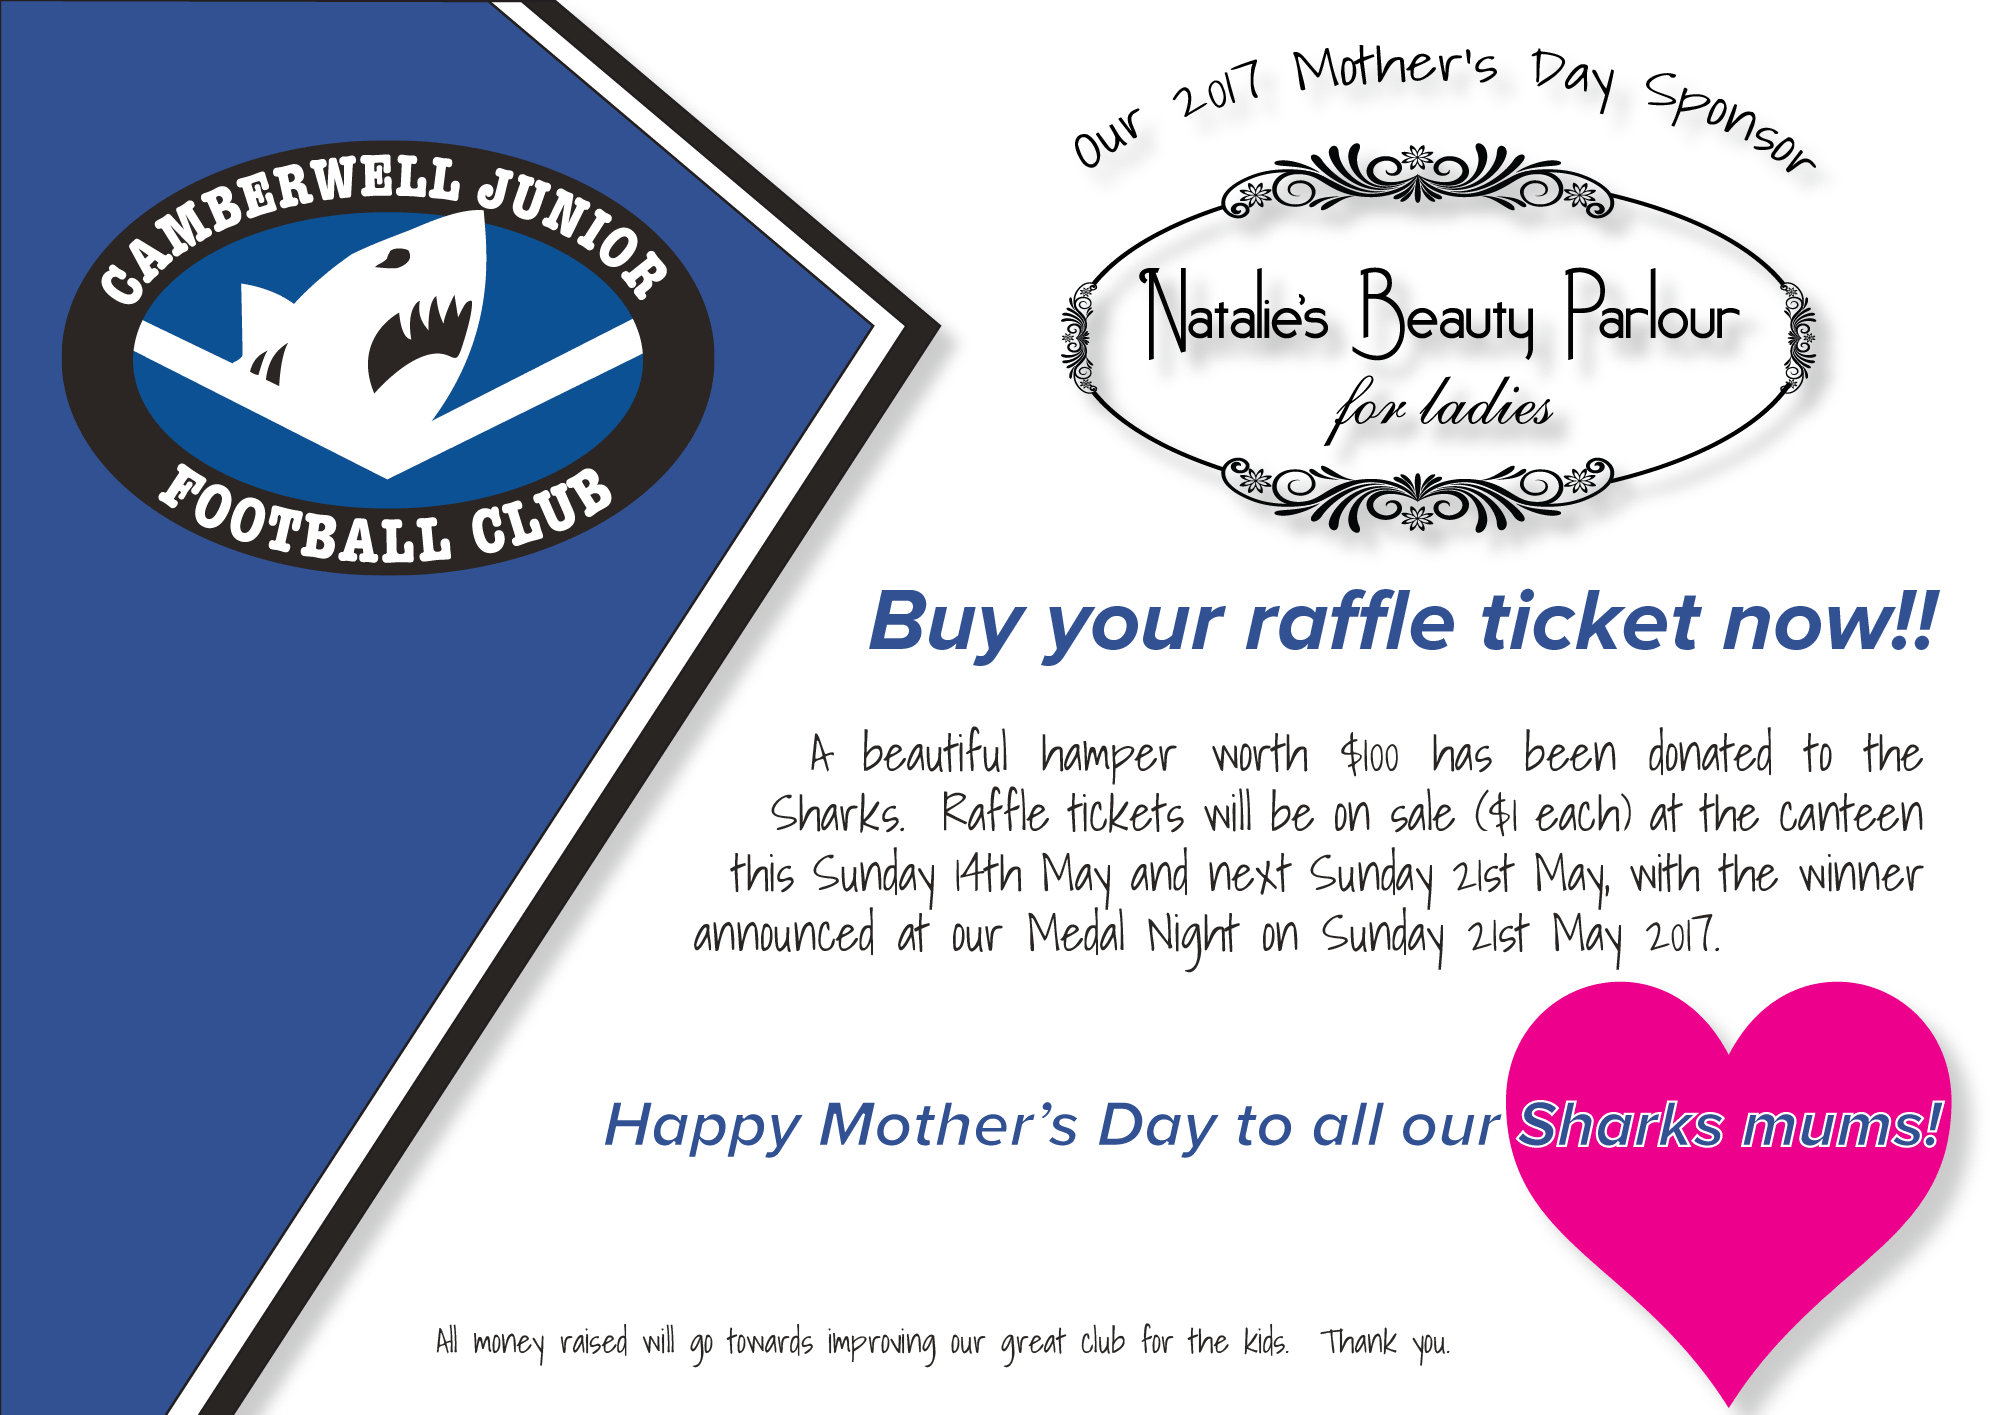 Buy your raffle ticket this week and next